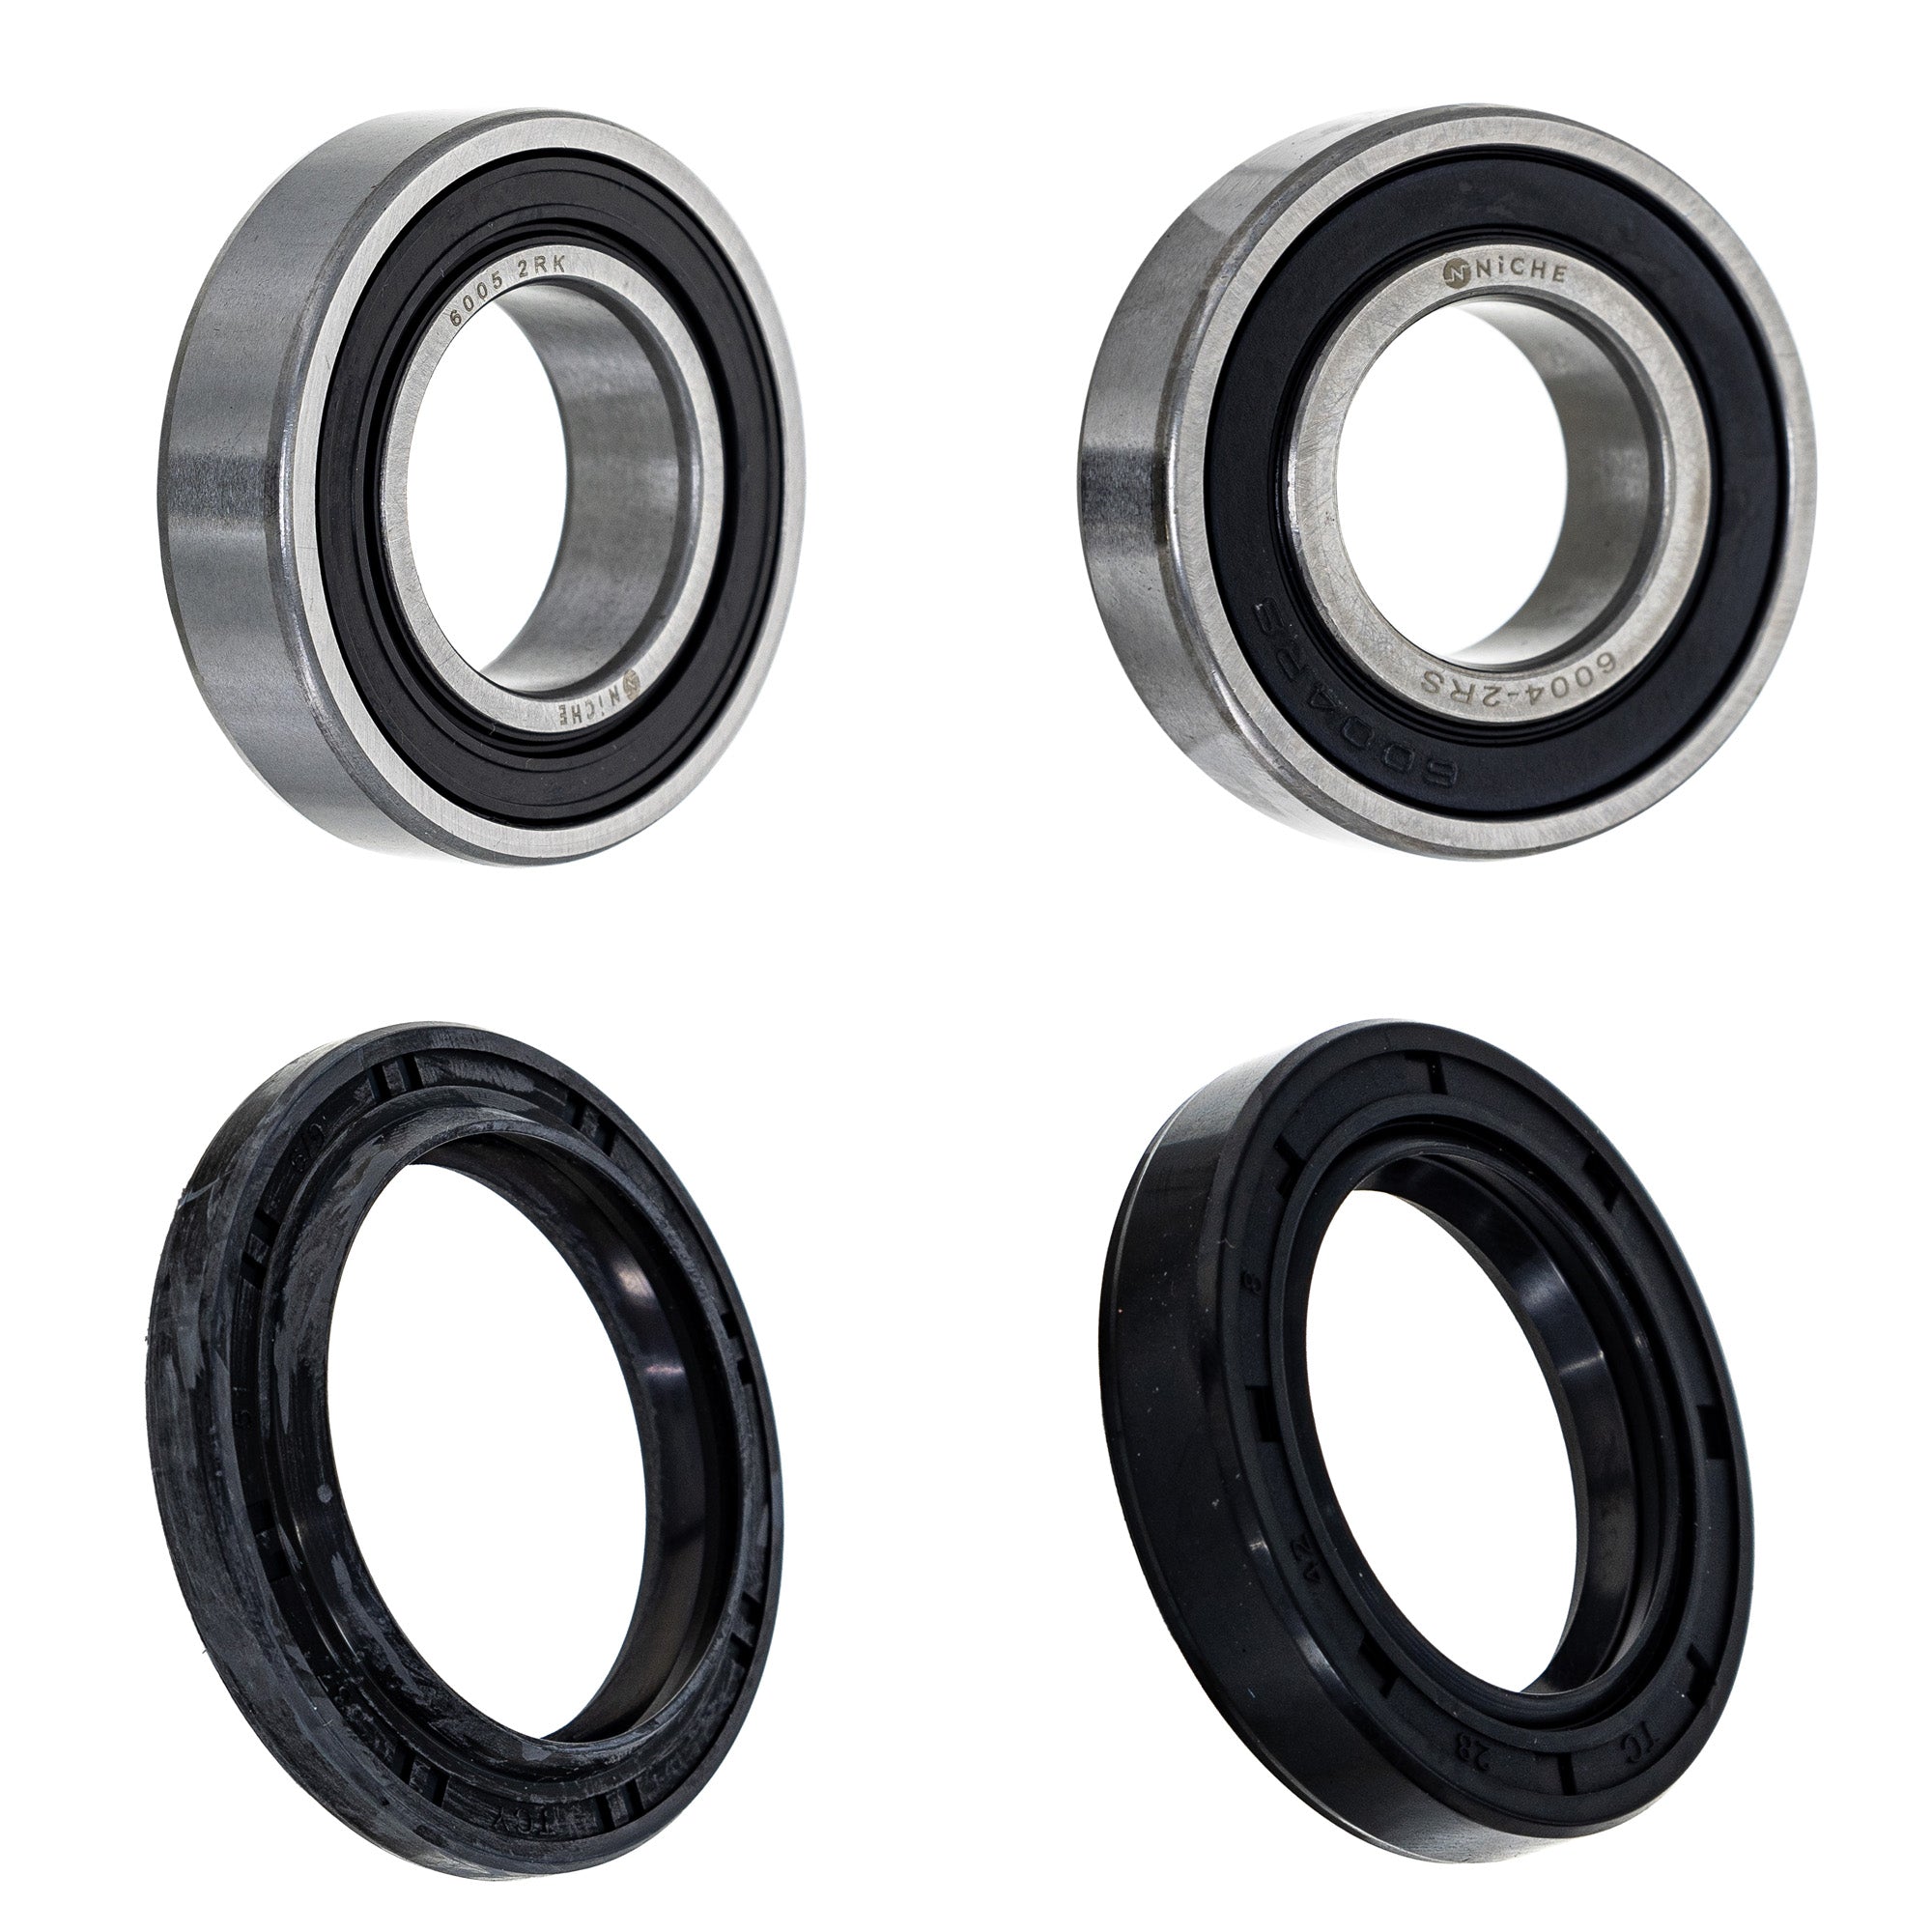 Wheel Bearing Seal Kit for zOTHER Ref No FourTrax NICHE MK1008865